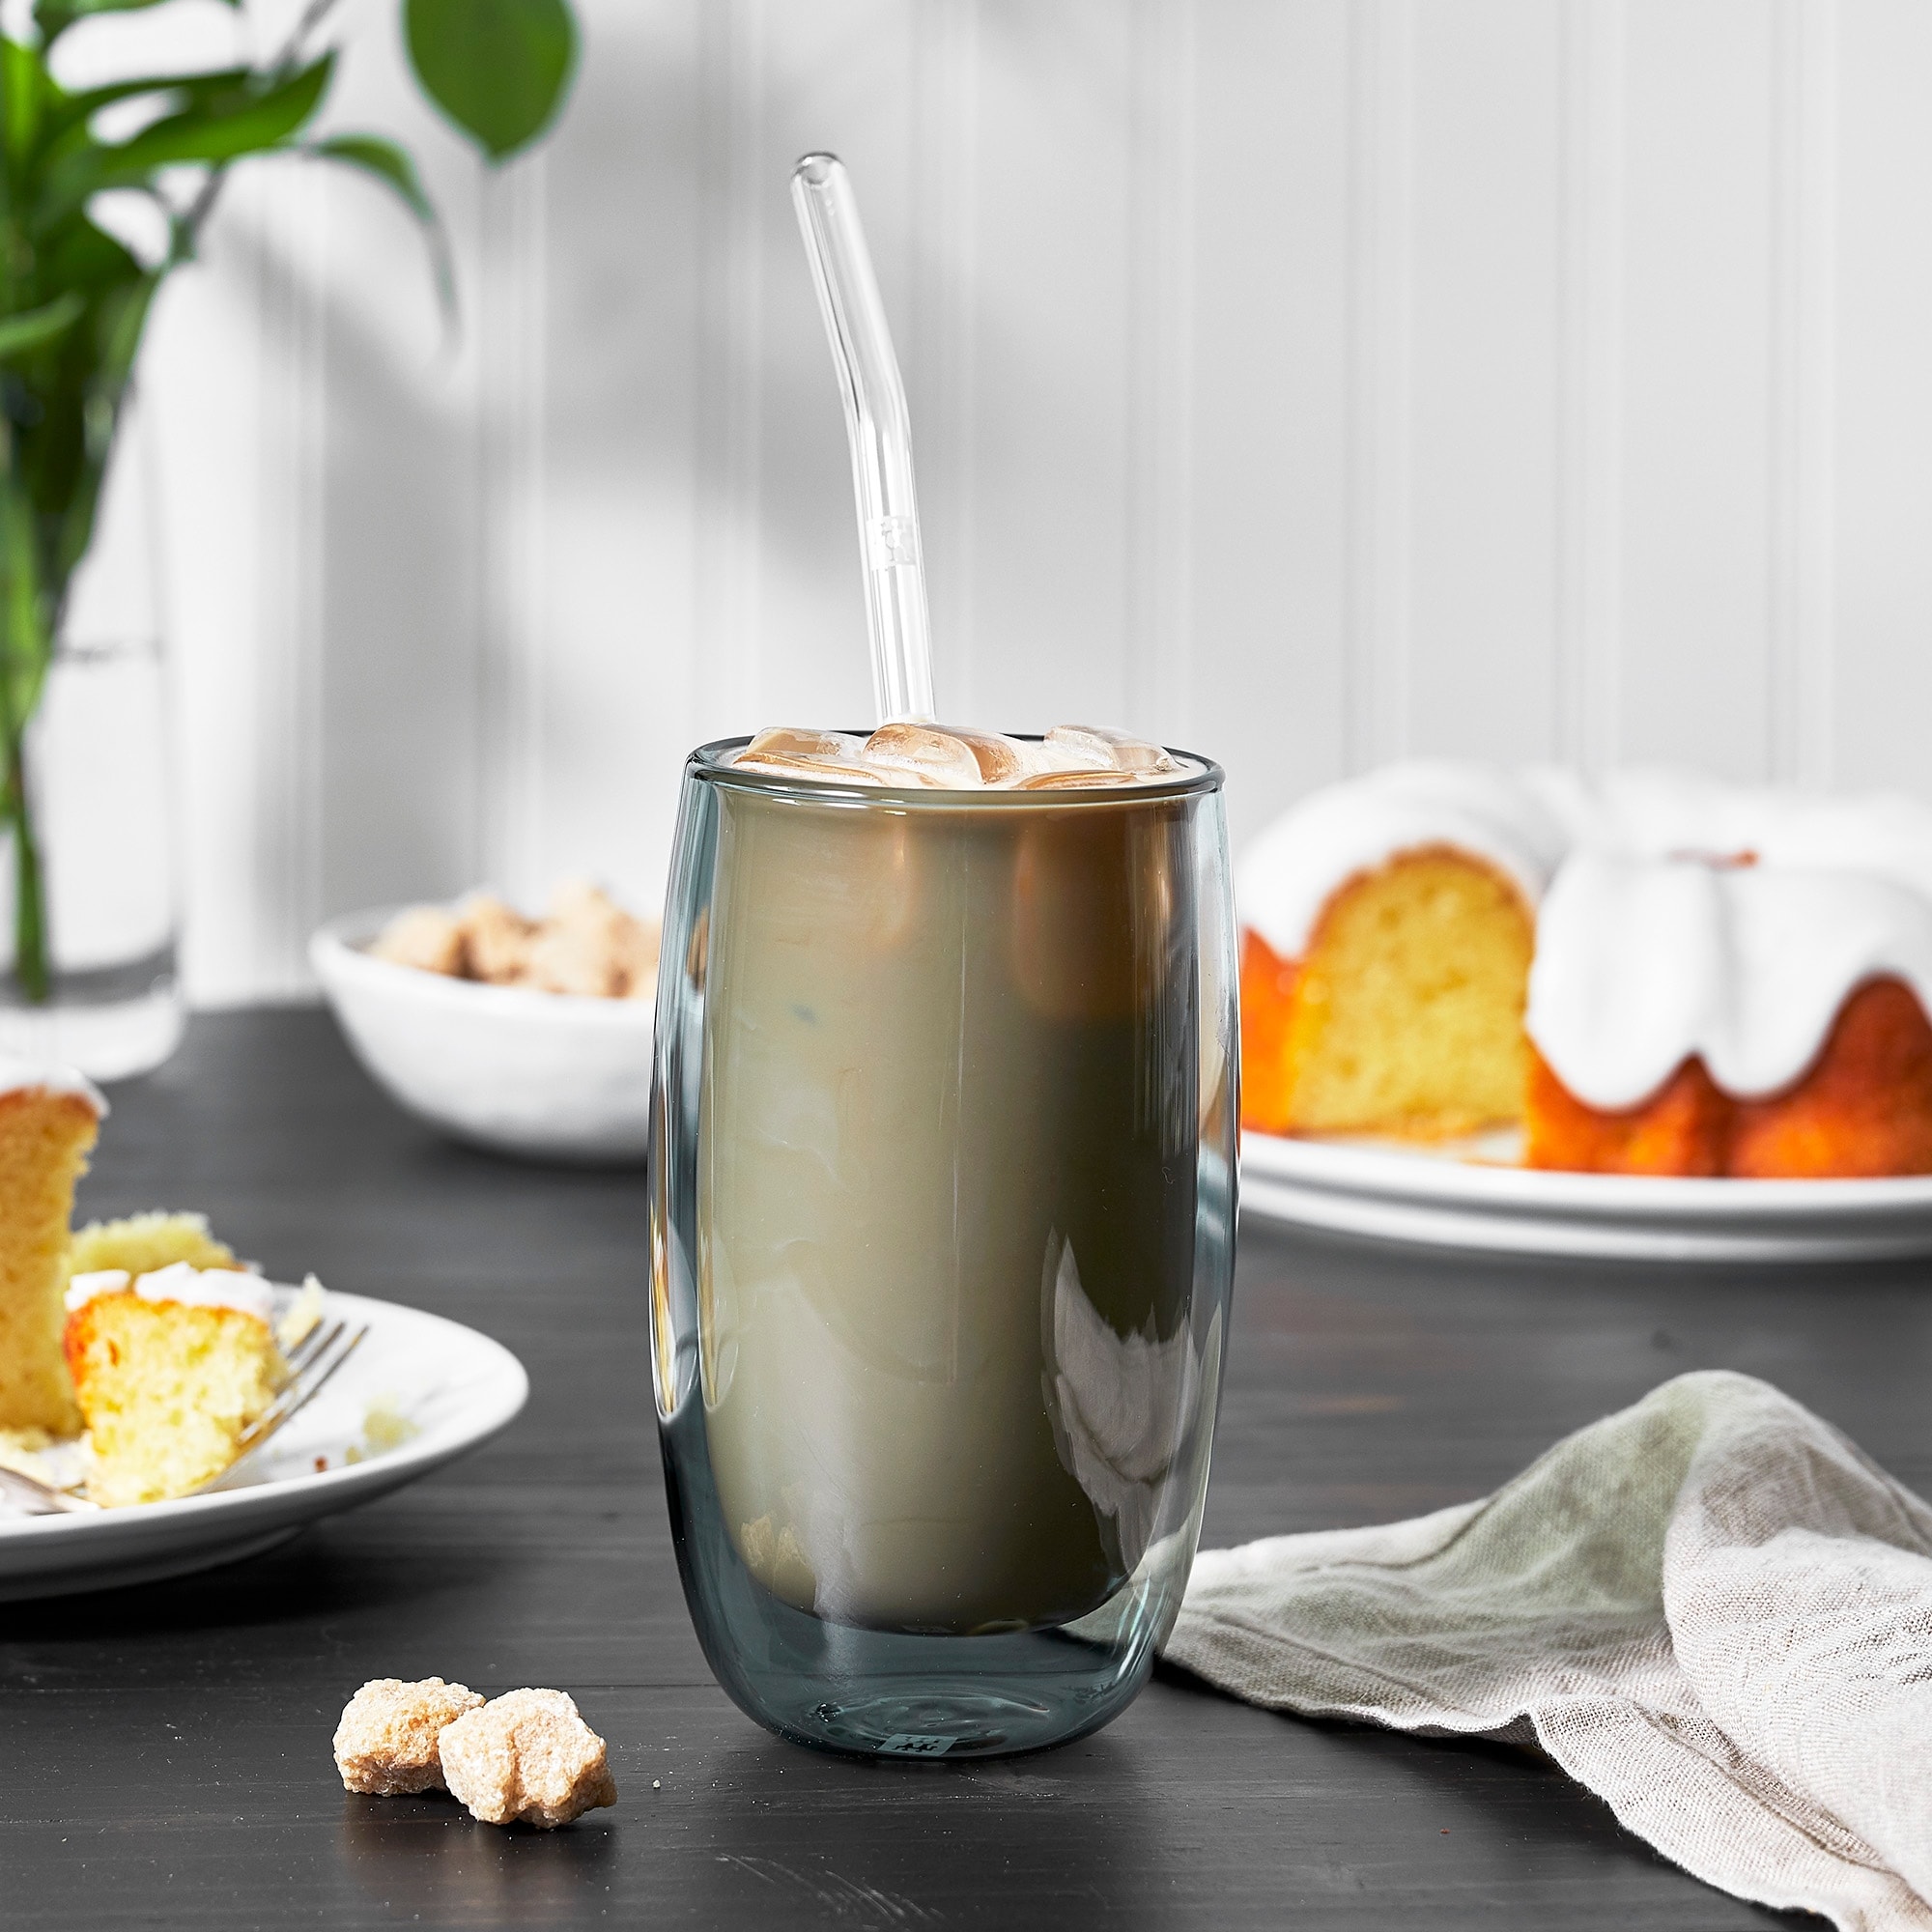 https://ak1.ostkcdn.com/images/products/is/images/direct/d630b0ac36113fc40d0dd10b69dda7c228845363/ZWILLING-Sorrento-8-pc-Double-Wall-Latte-Glass-%26-Straw-Set.jpg